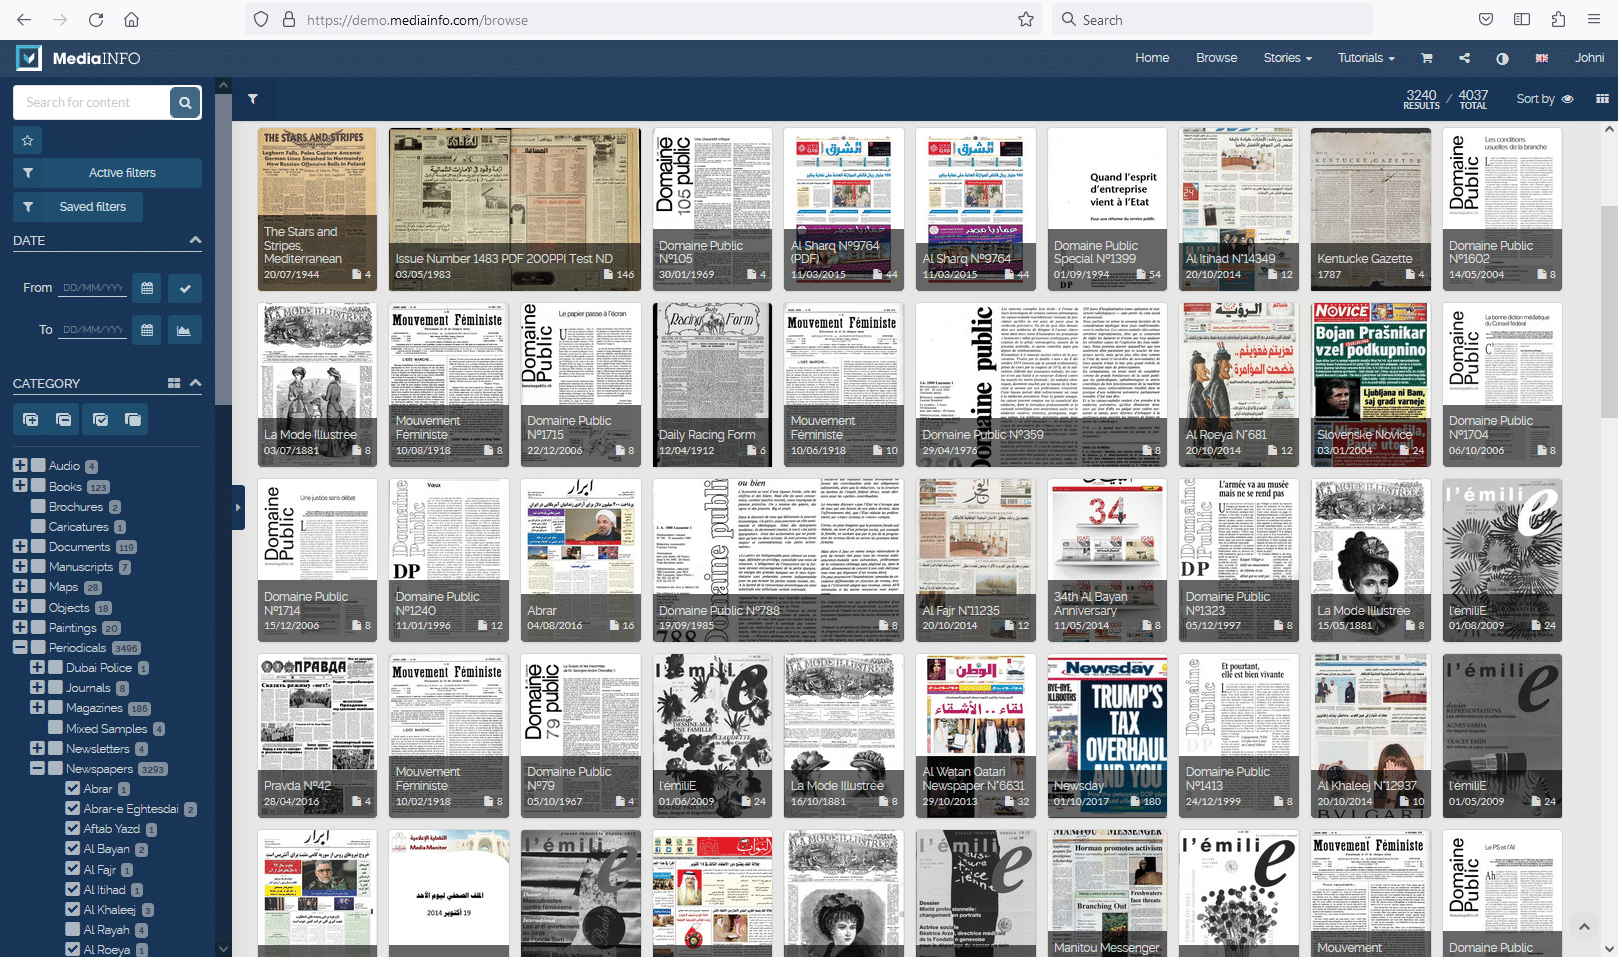 Newspaper search results in MediaINFO